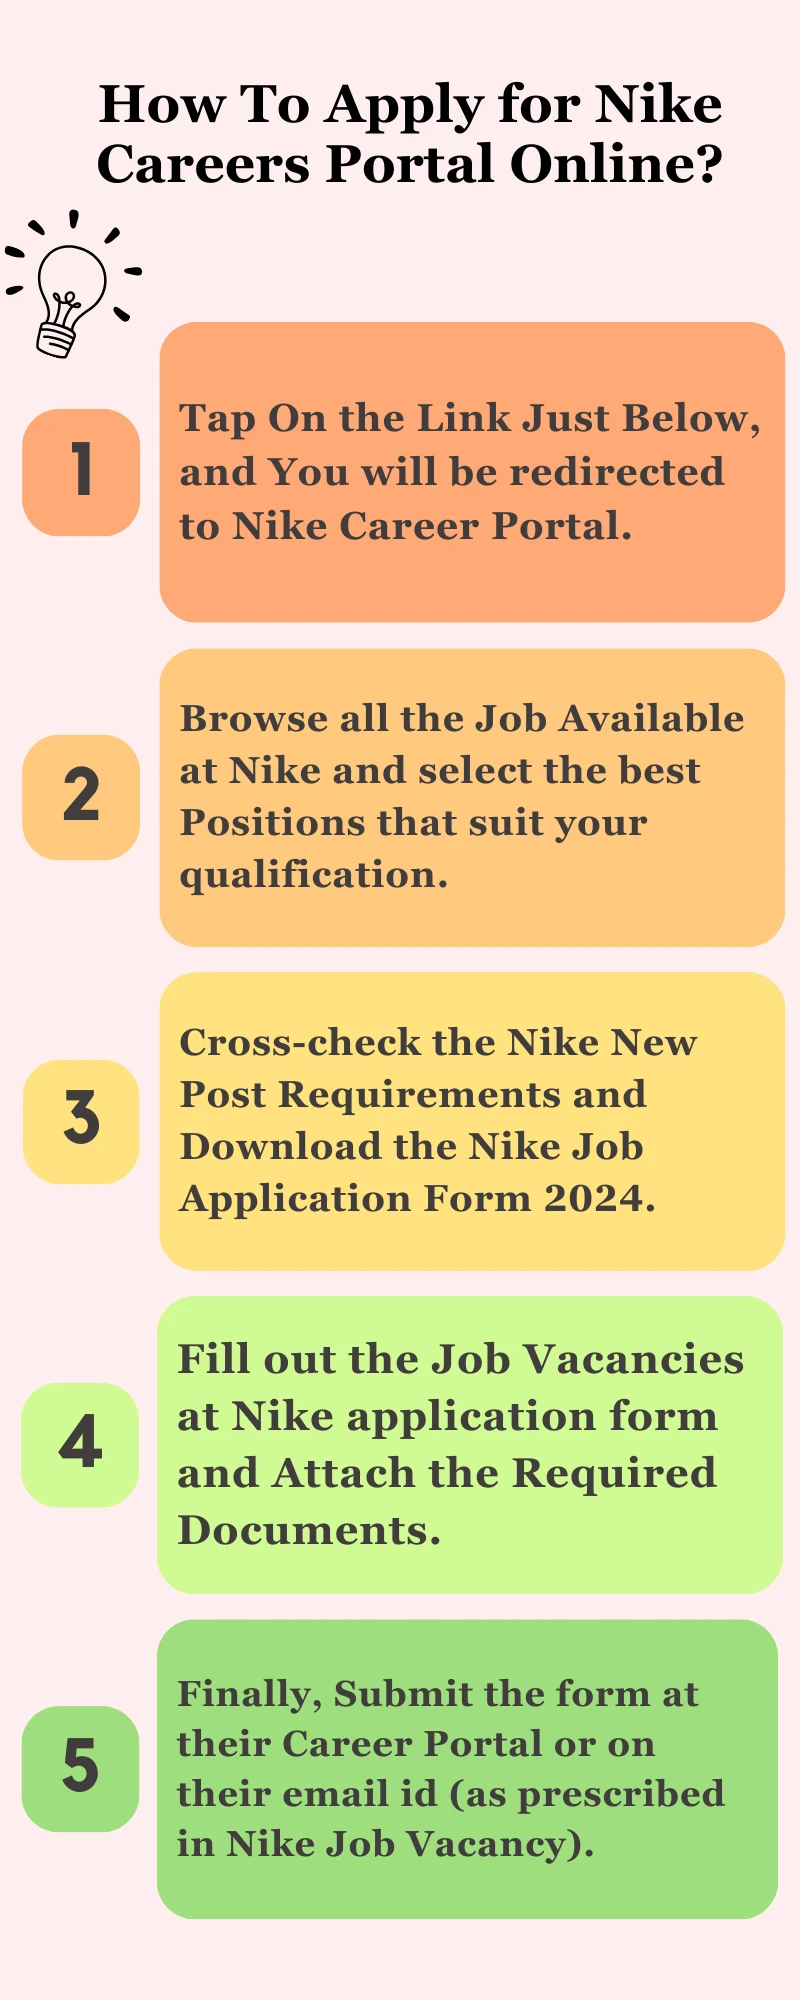 How To Apply for Nike Careers Portal Online